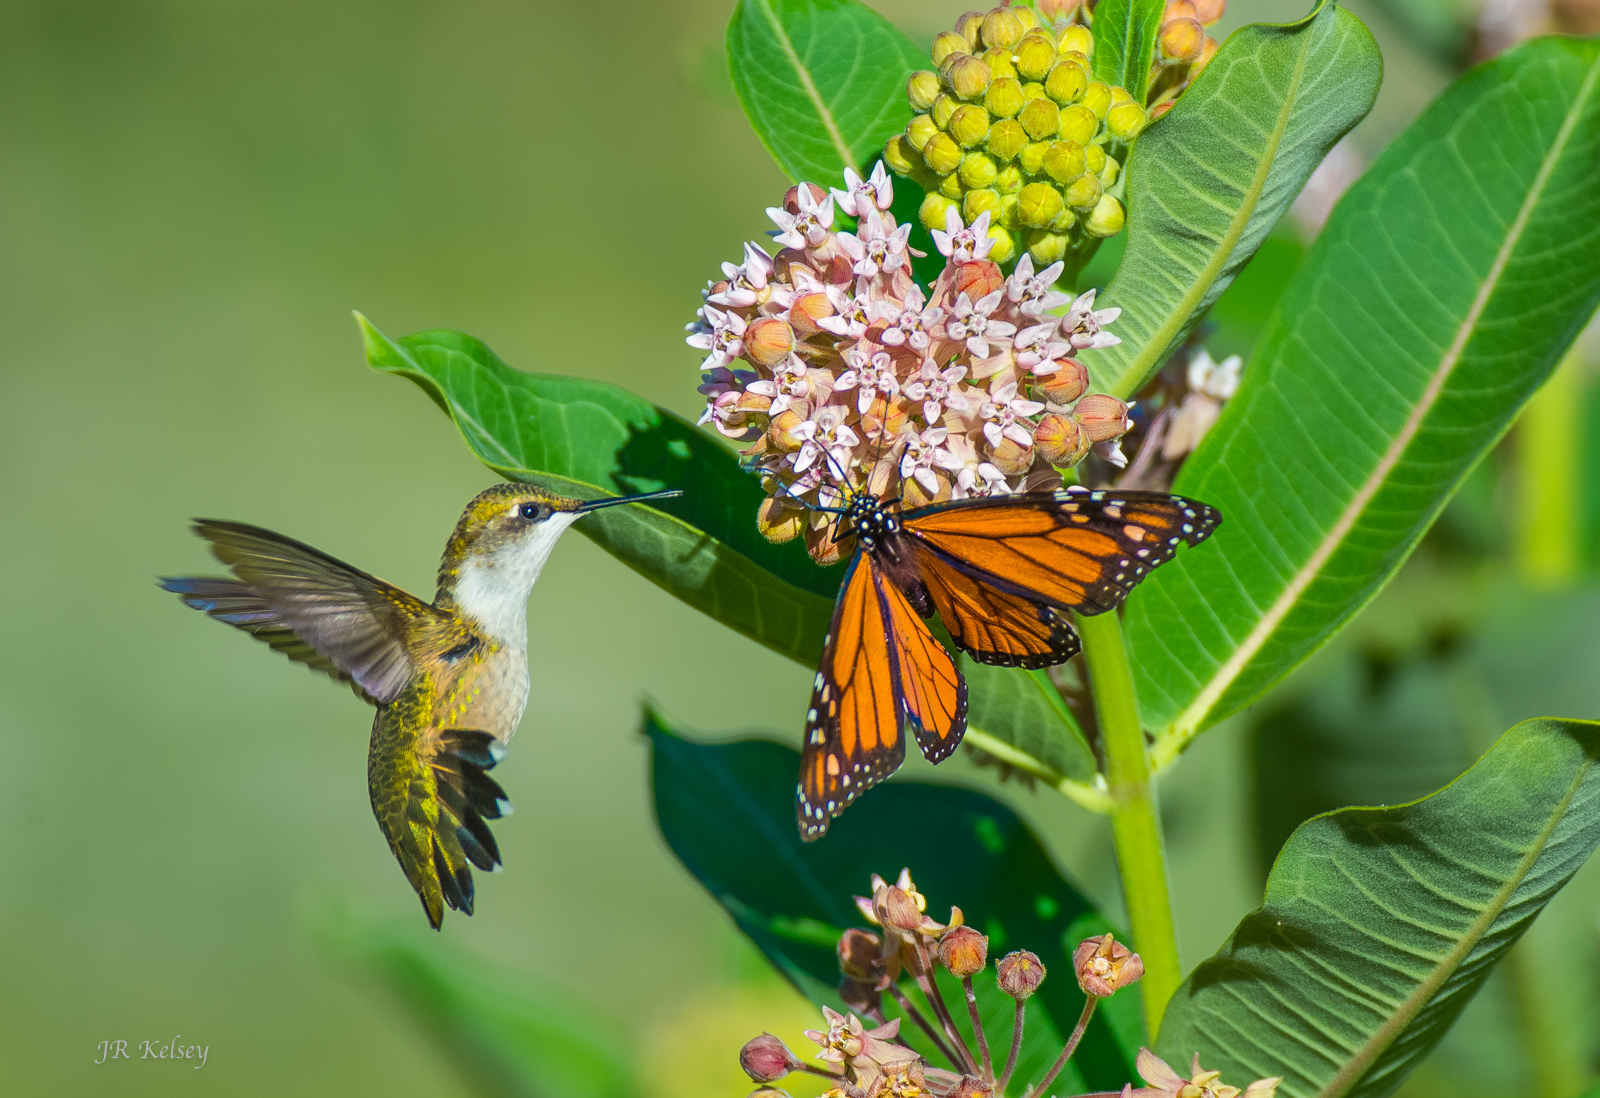 Spend your Earth Day Planting for Pollinators